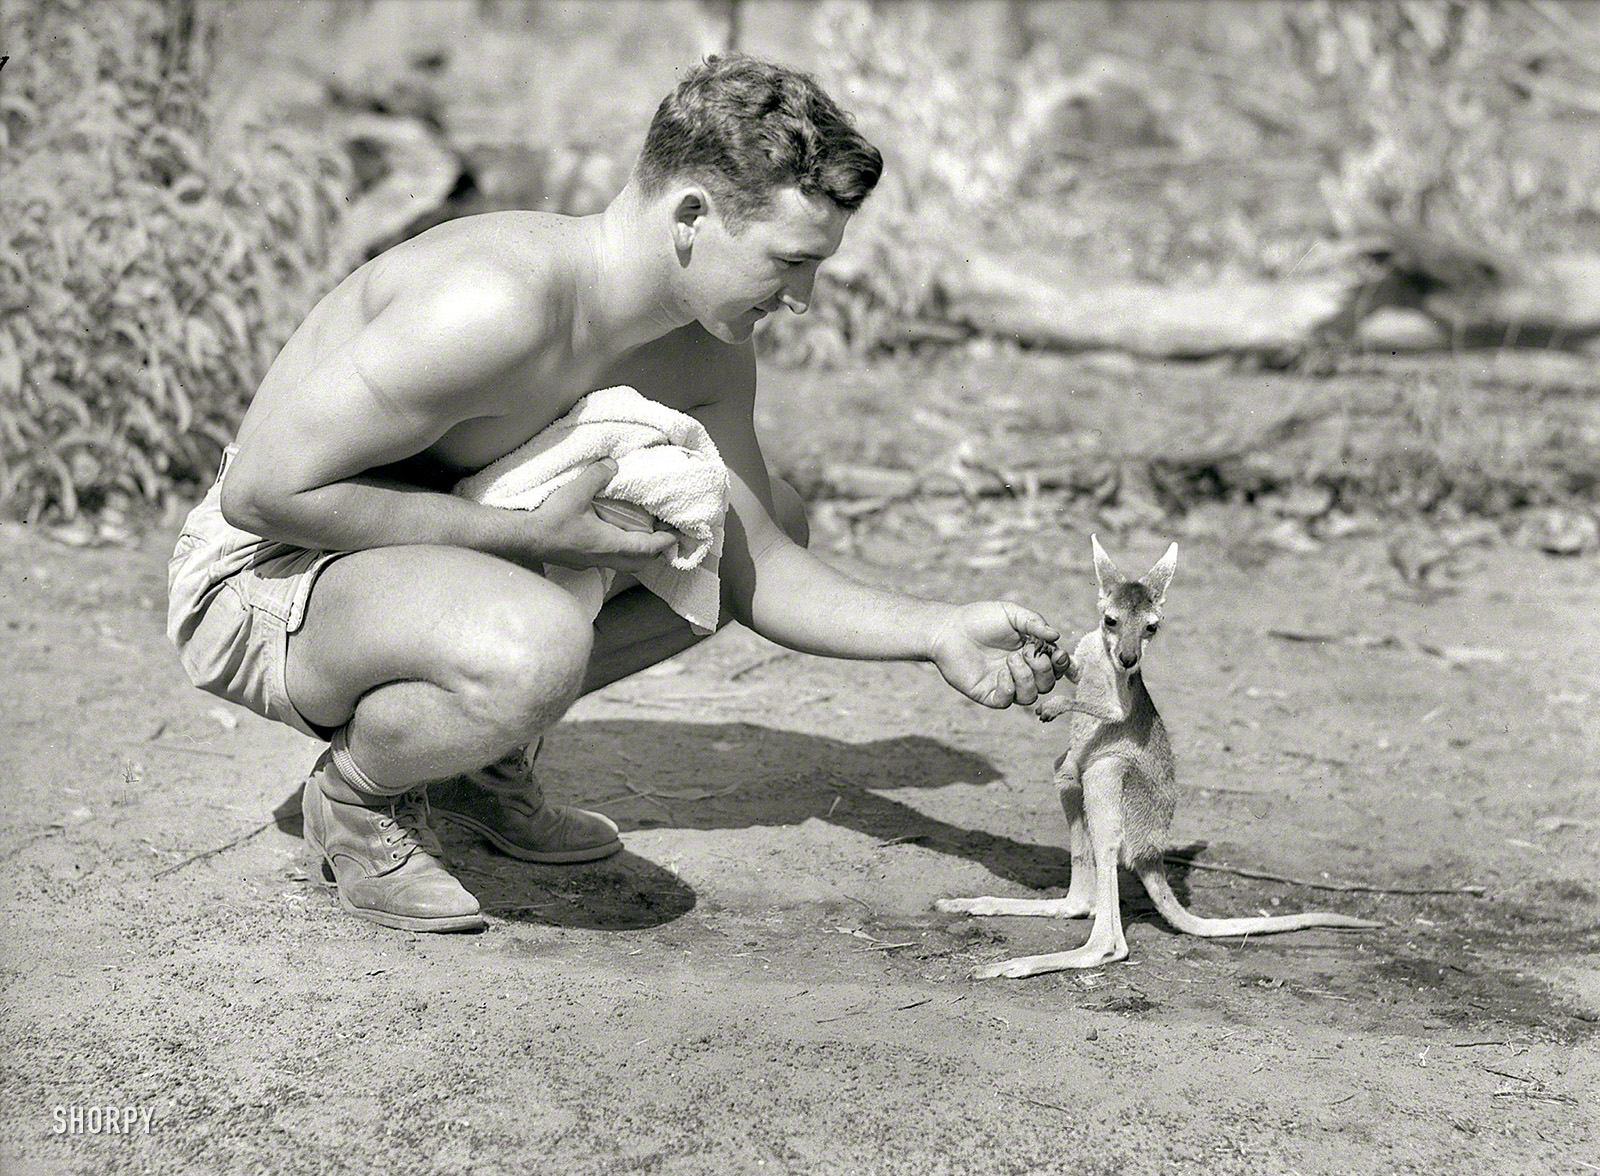 September 10, 1942, somewhere in Australia. "American soldier at advanced allied base with his pet kangaroo." Photo by John Earl McNeil. View full size.